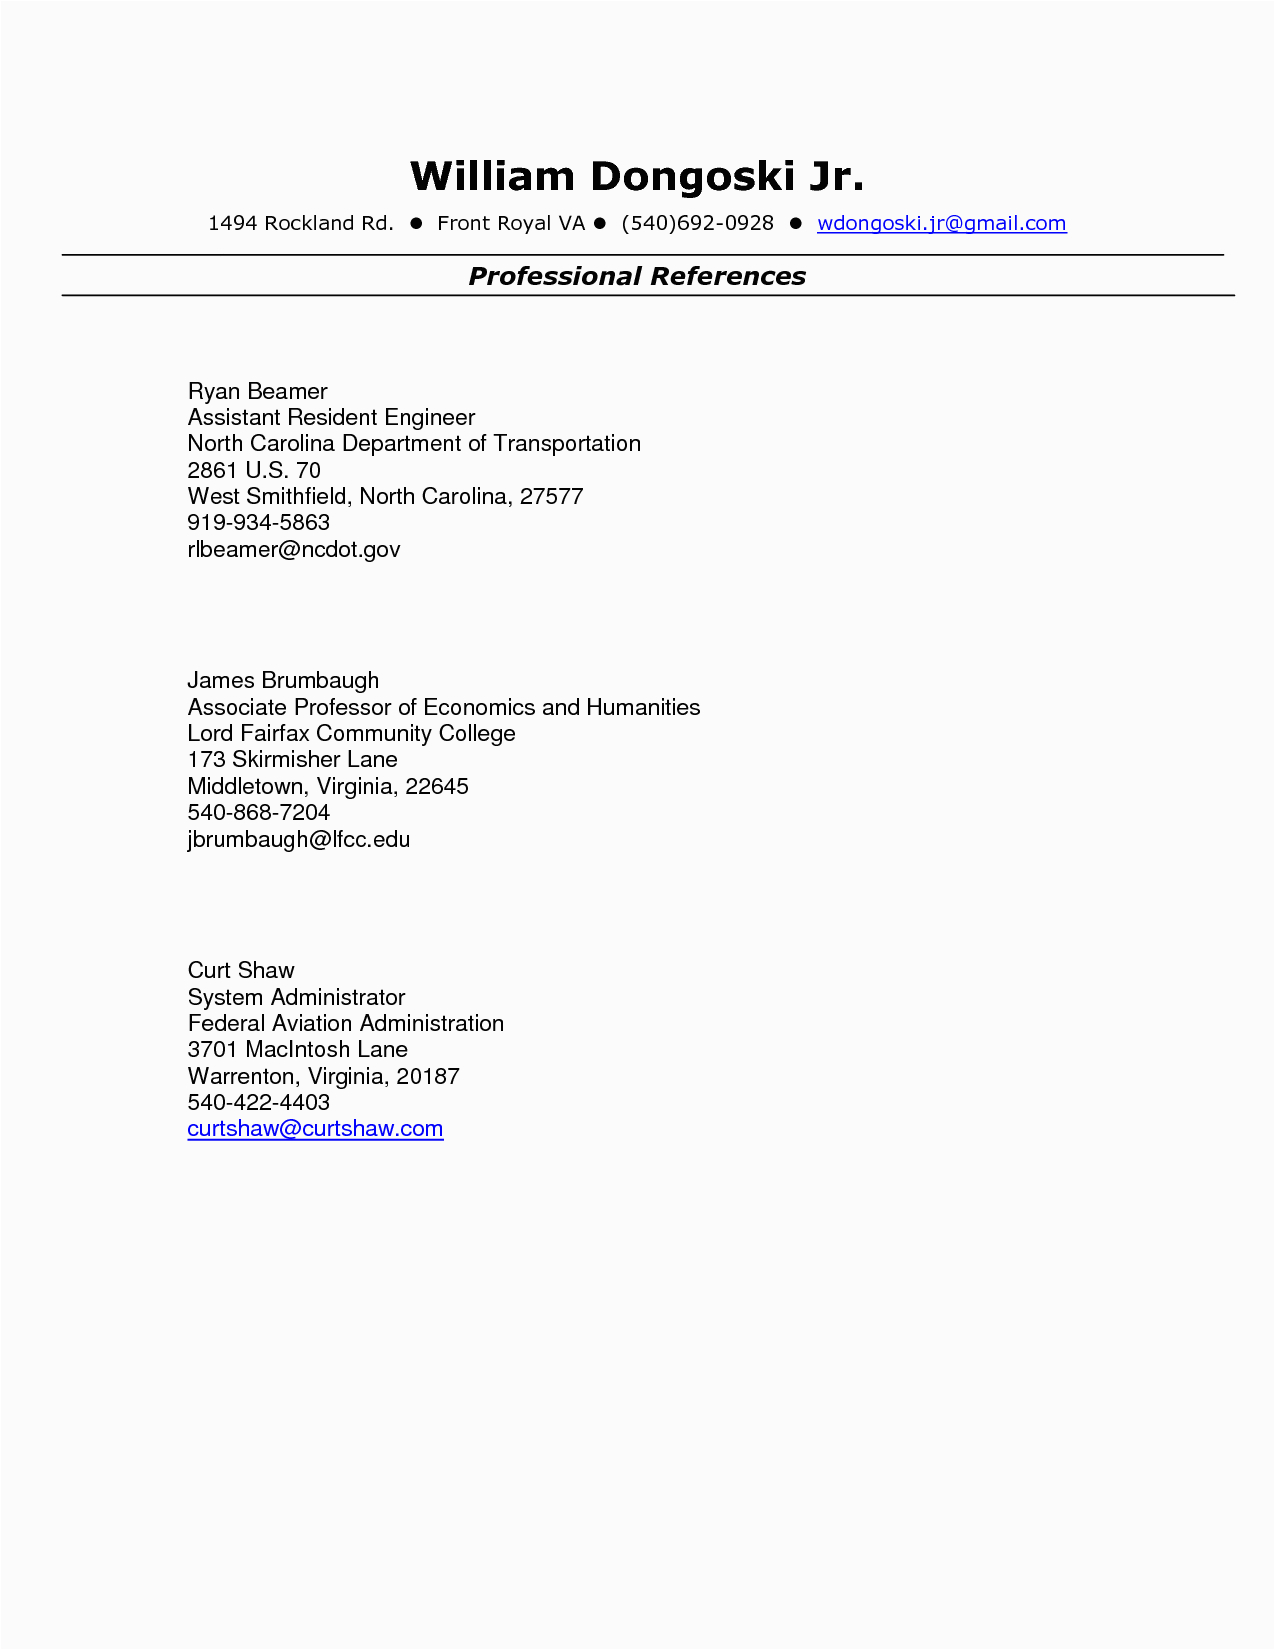 Sample Resume format with Character Reference Resume Reference Sample Huroncountychamber